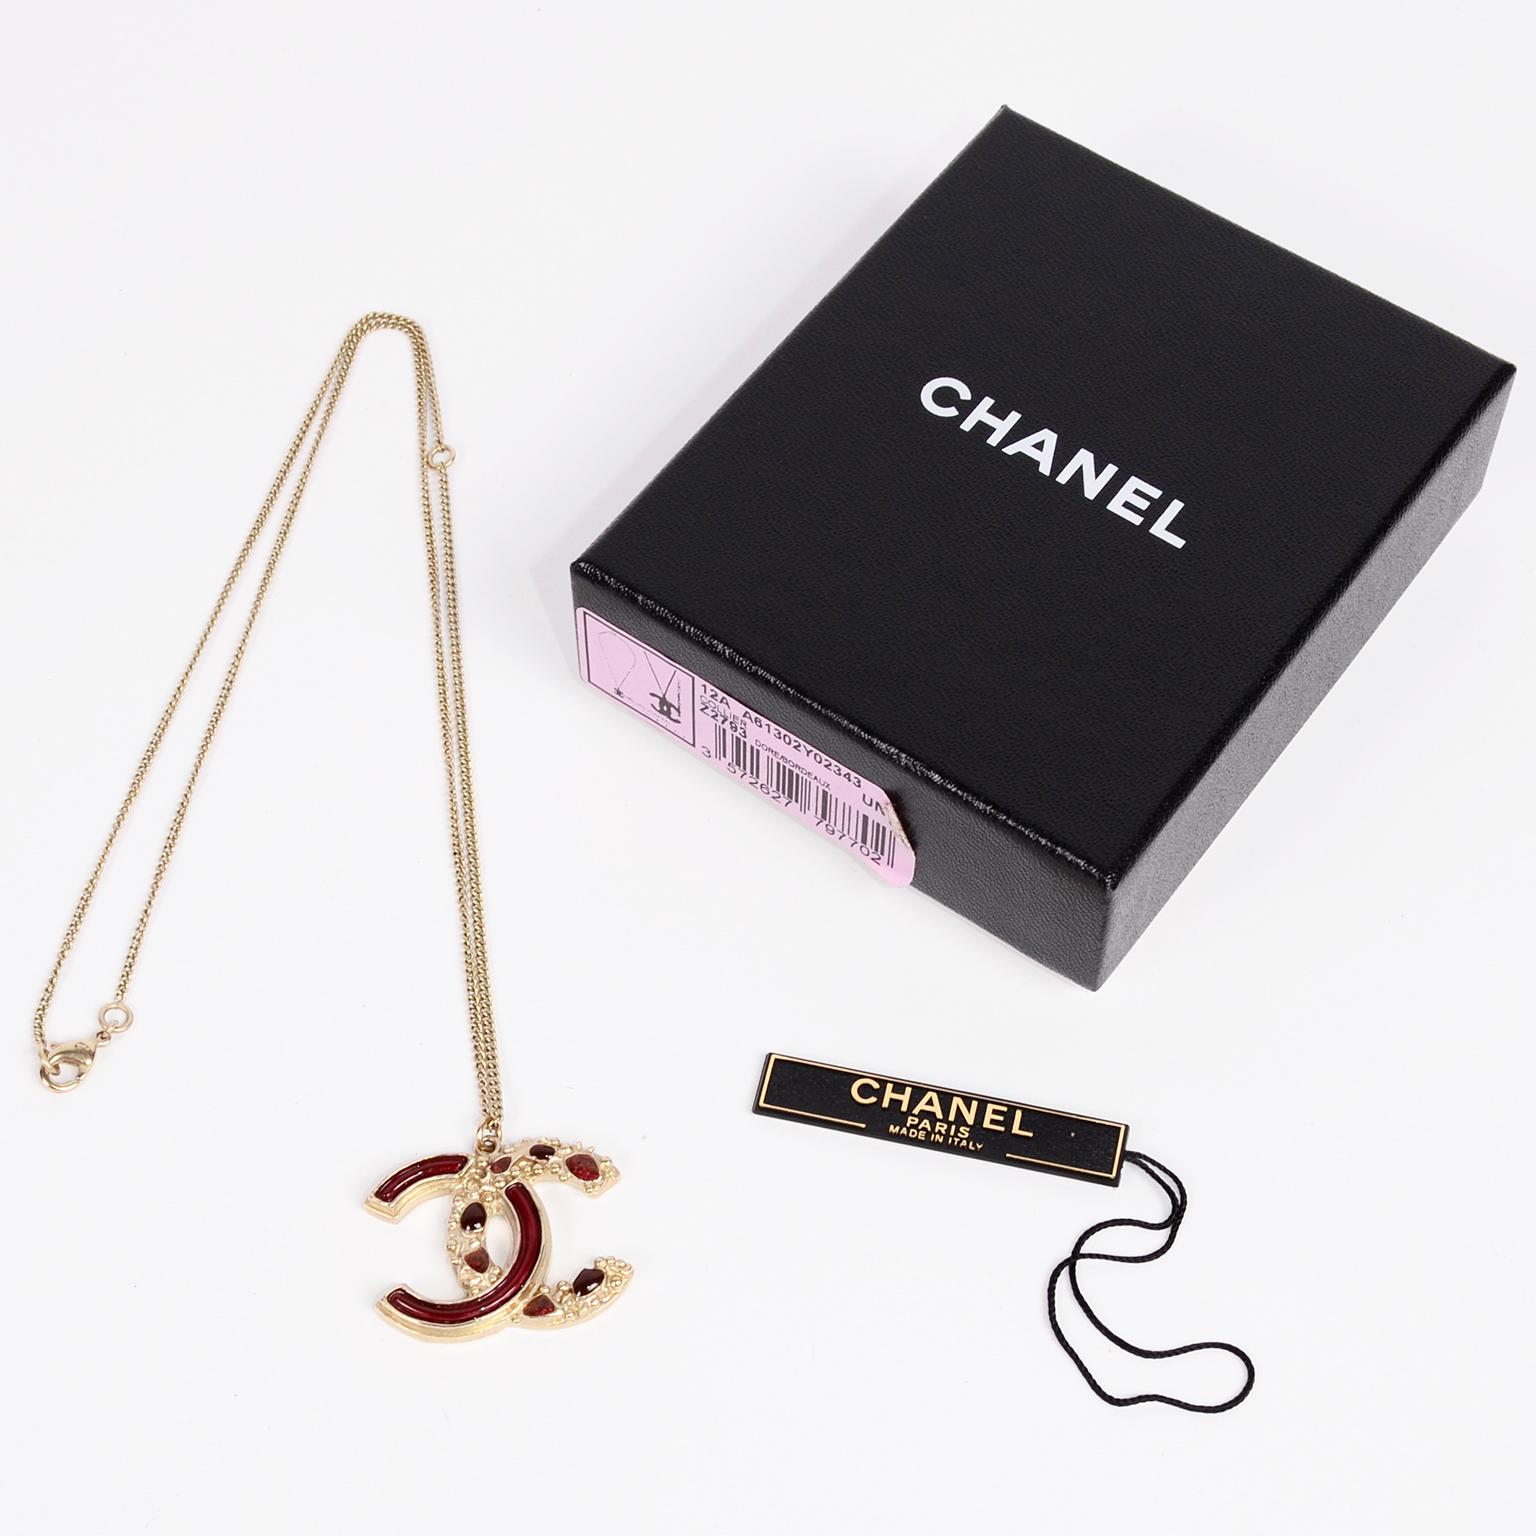 This is a gorgeous Fall 2012 Chanel CC Pendant Necklace with its original box and tag.  The back of the CC logo is a sparkle maroon and the front has the same maroon with the second C having individual gripoix (poured glass) stones filled into the